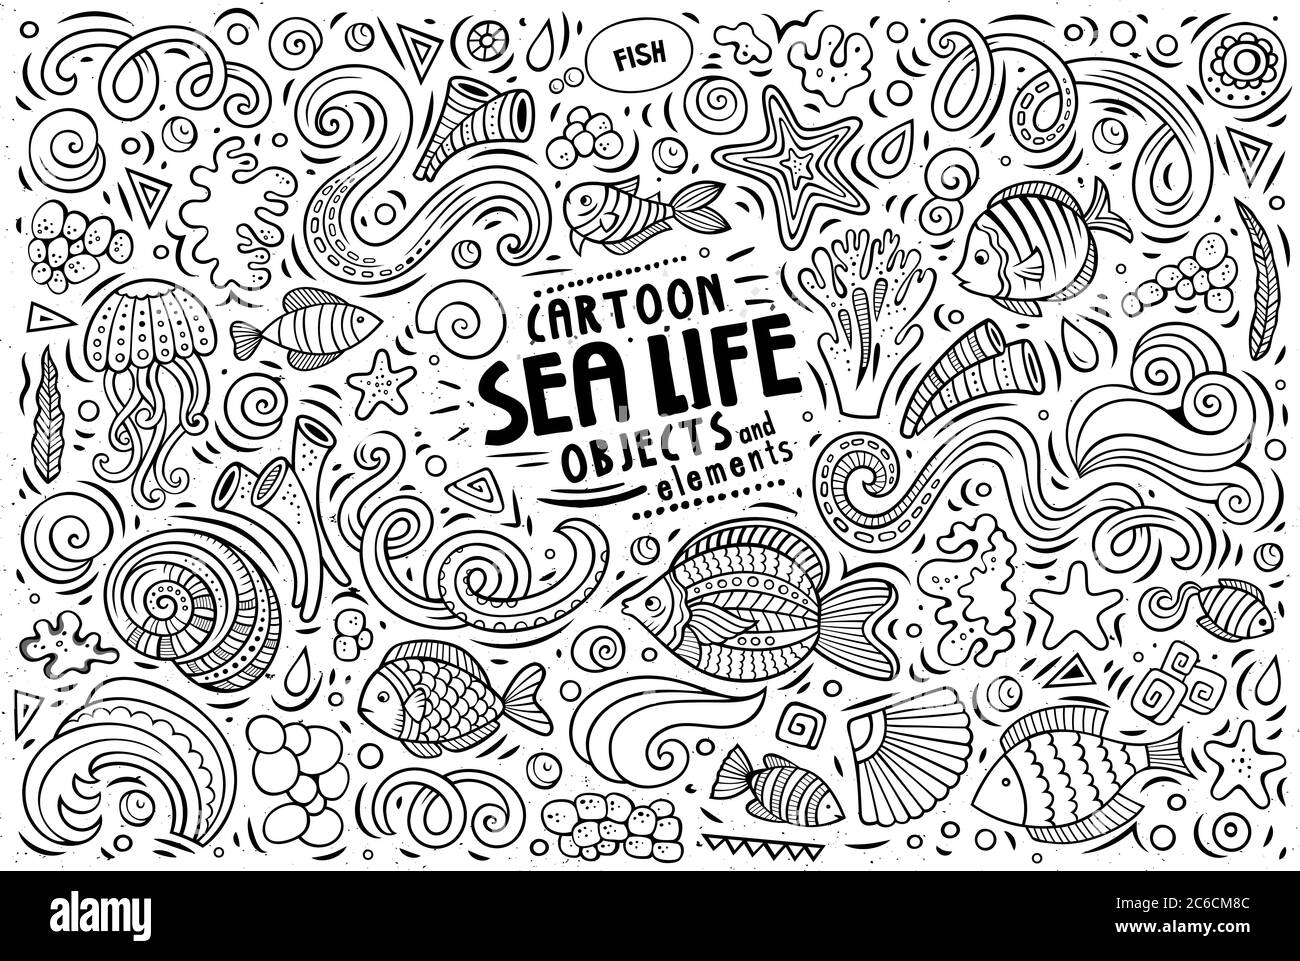 Doodle cartoon set of Sea Life objects and symbols Stock Vector